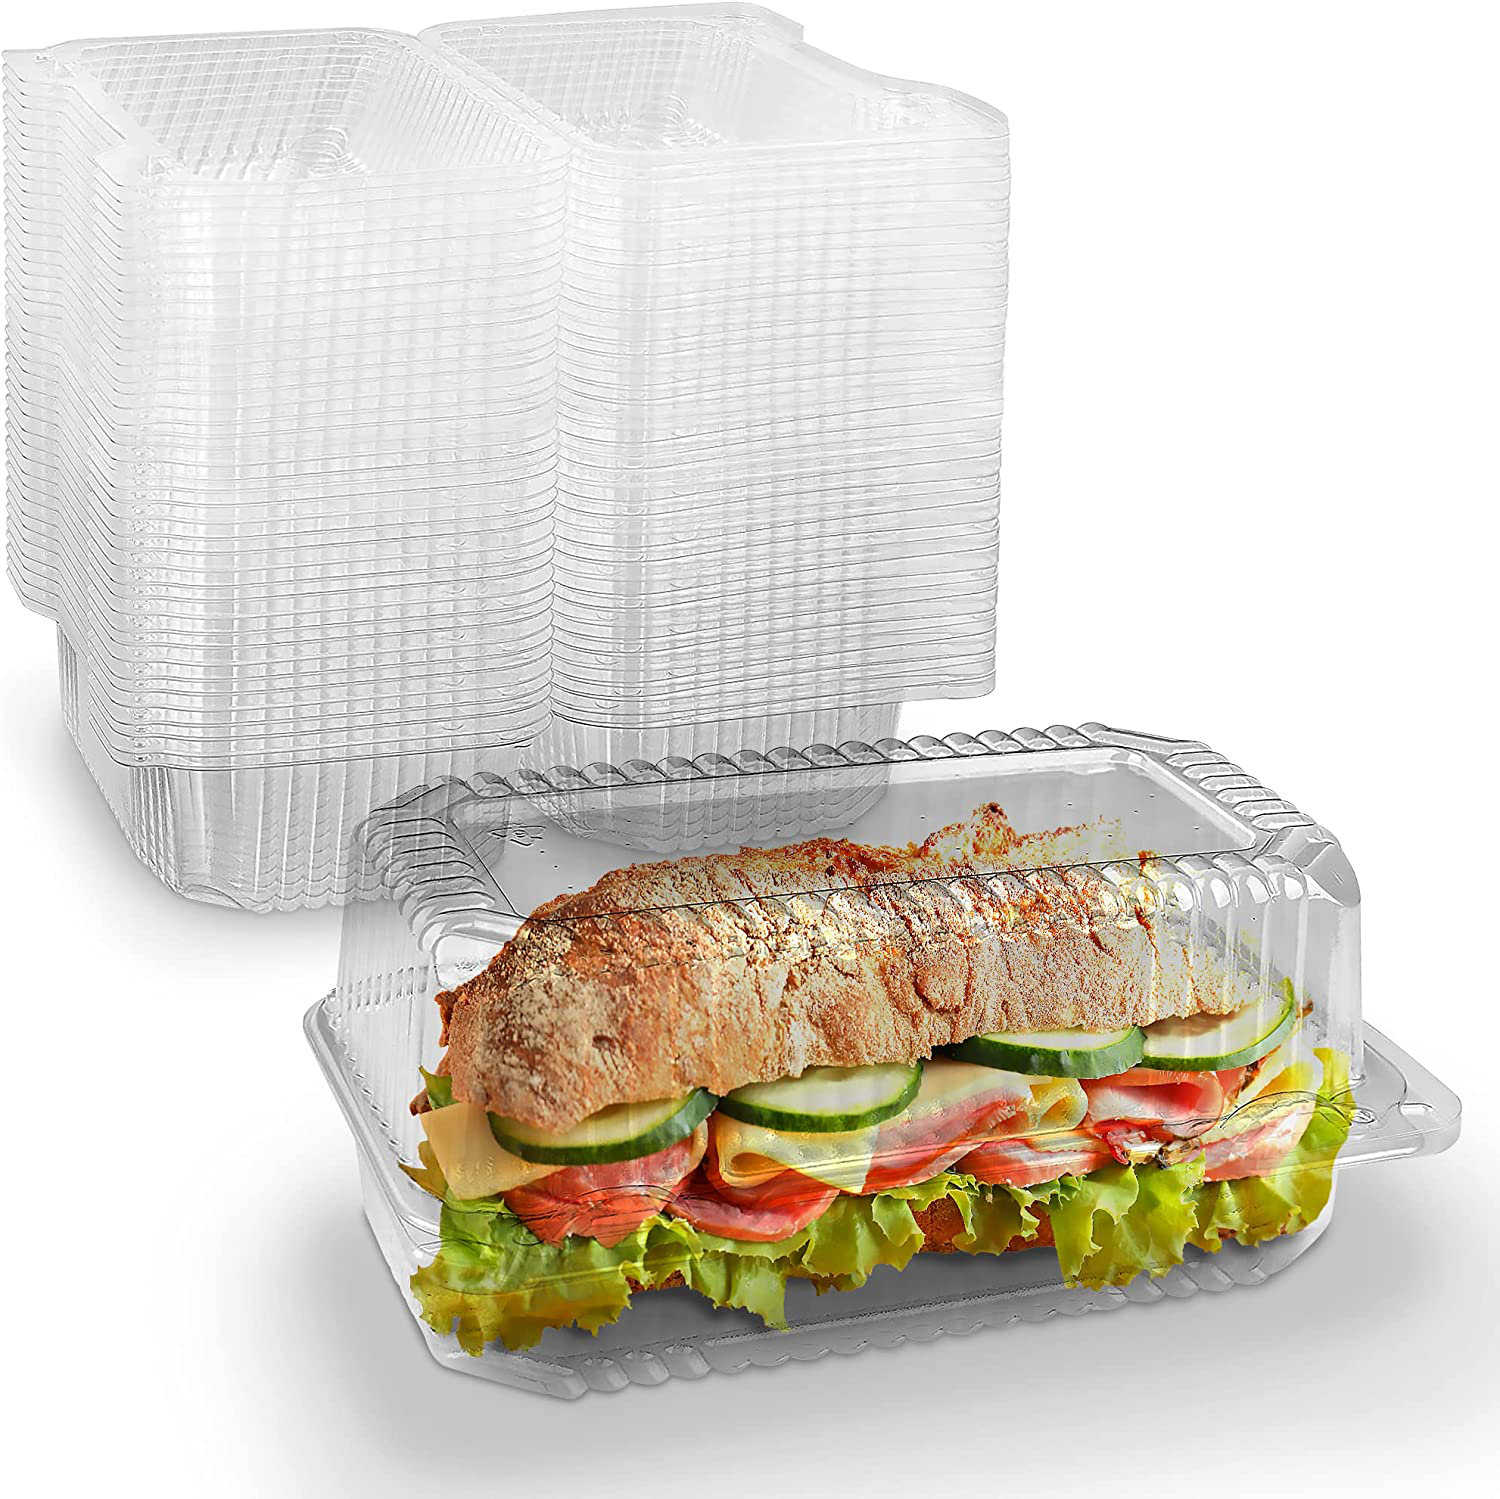 100 Pcs Clear Hinged Plastic Containers with Lids,Individual Cake Slice Containers,Square Plastic Food Container,Disposable Clamshell Take Out